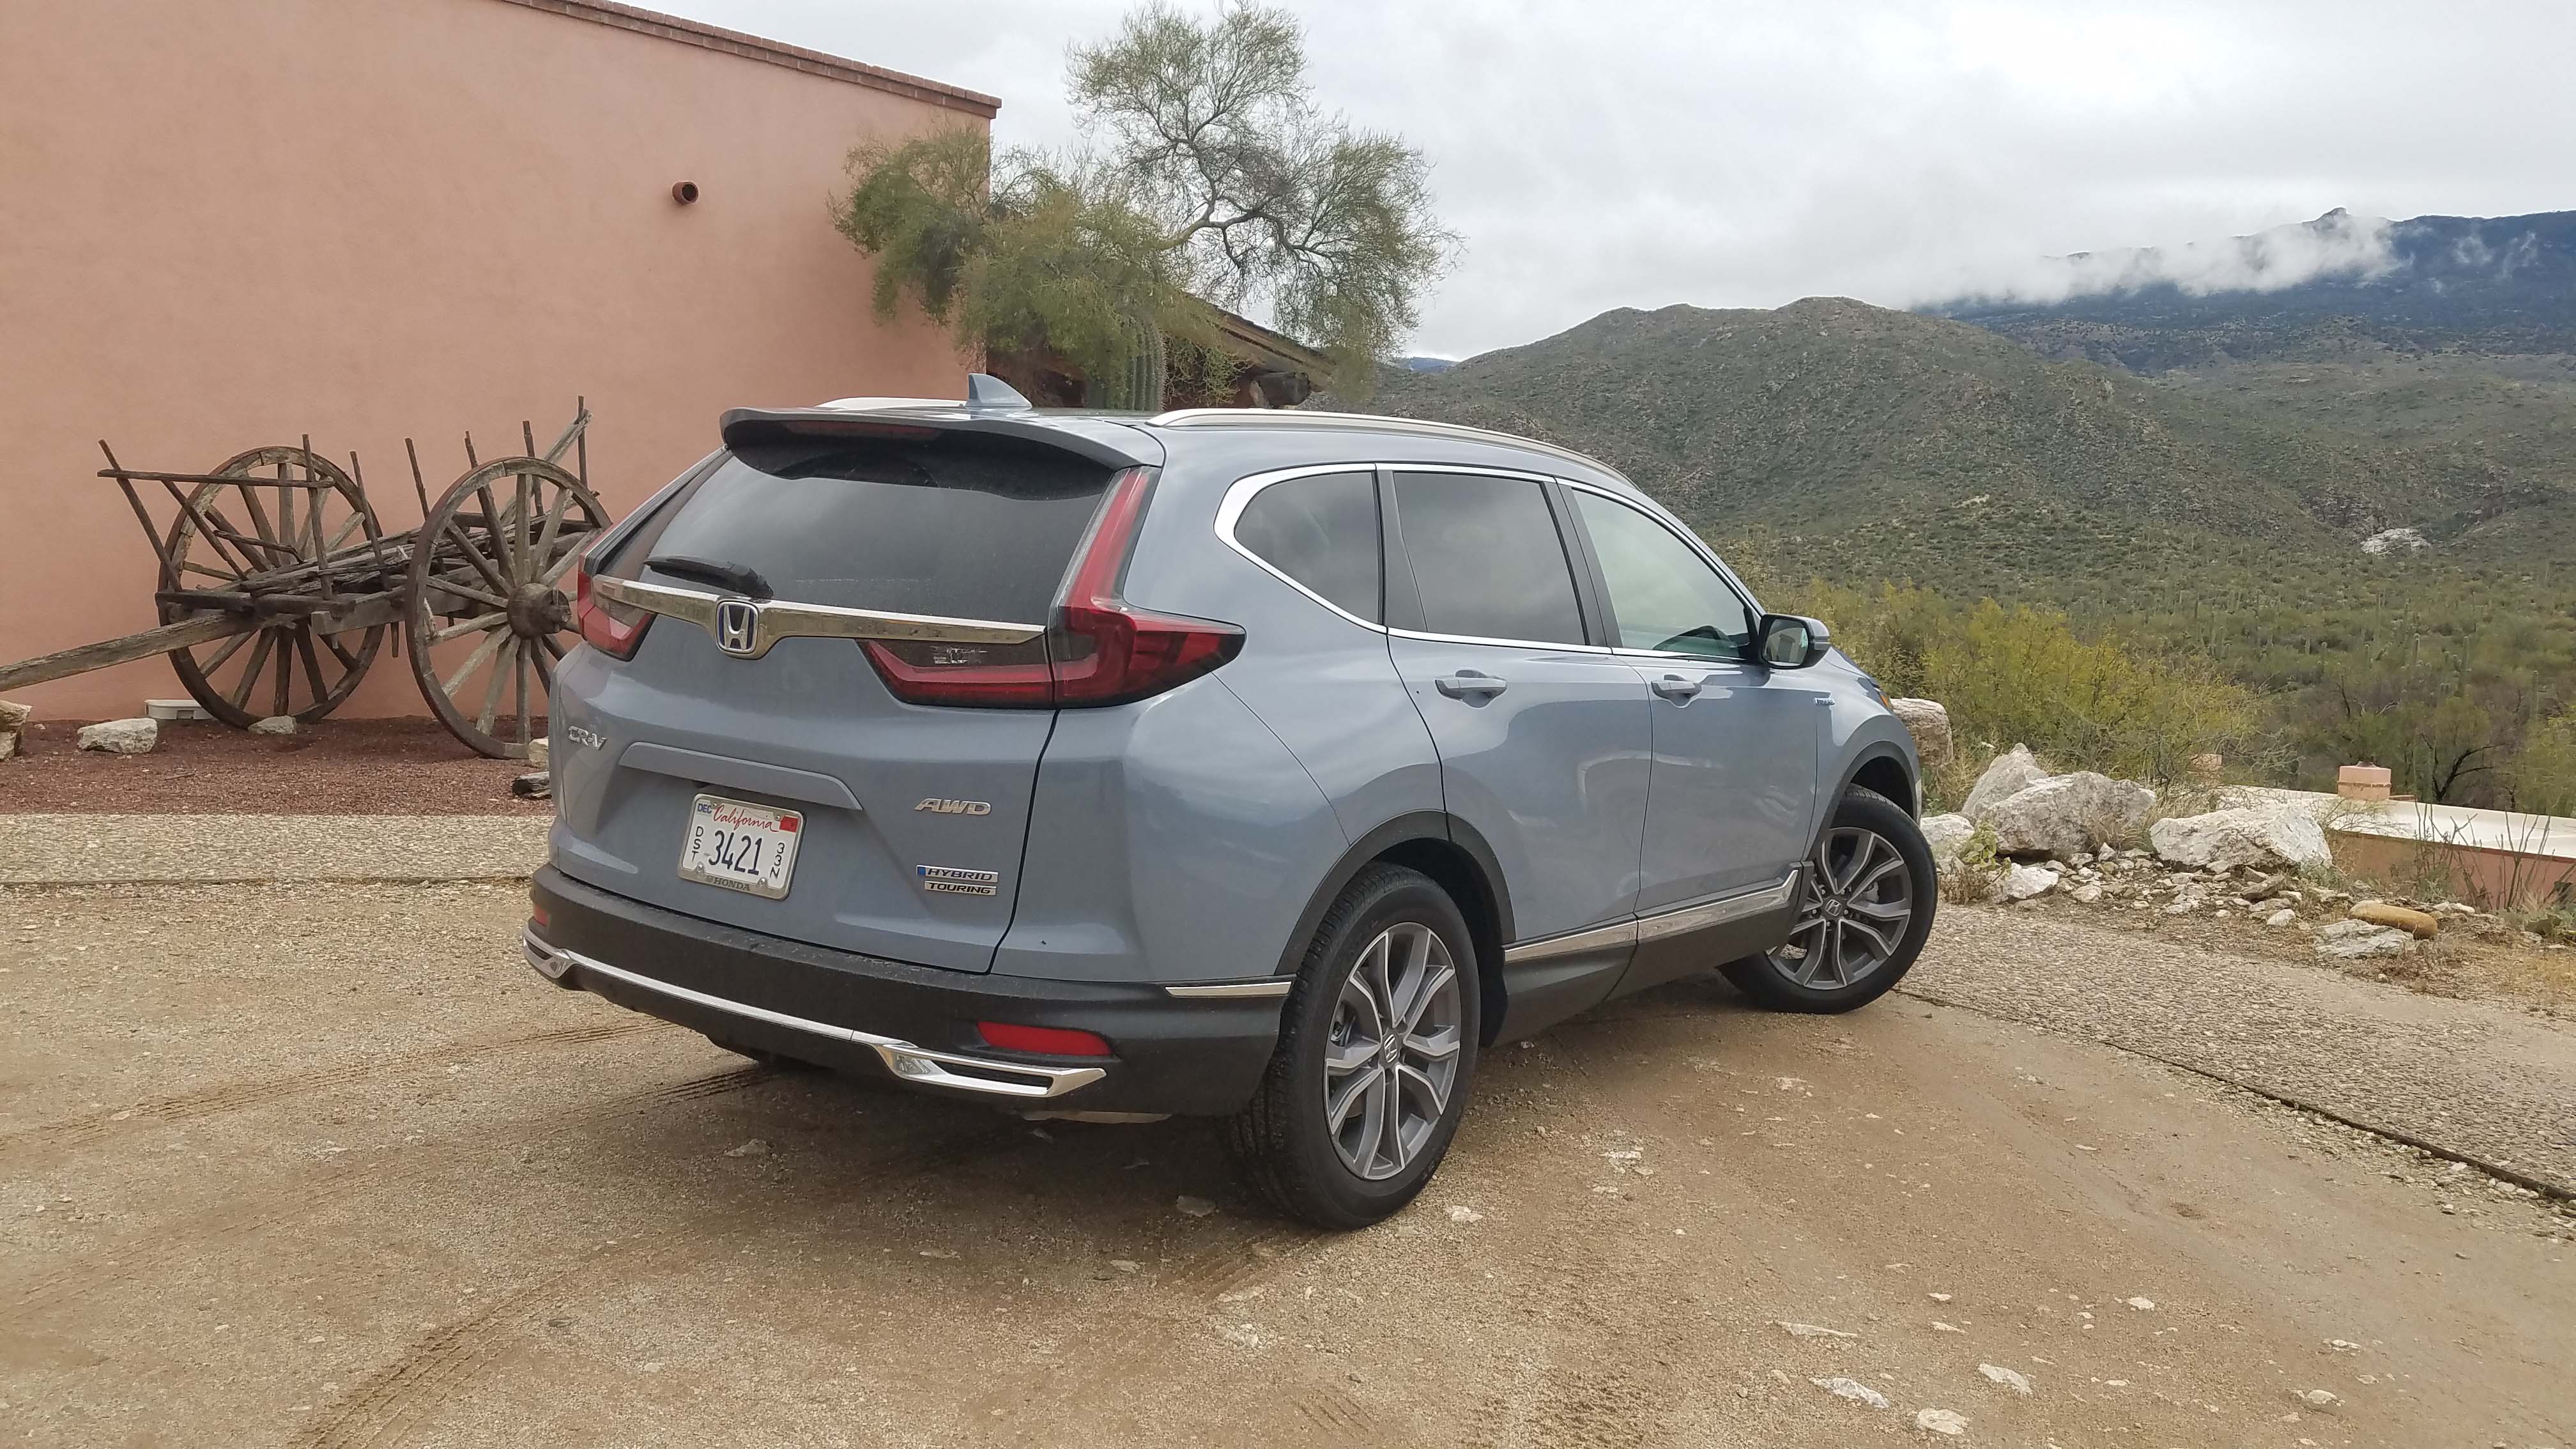 The 2020 Honda CR-V Hybrid joins the compact SUV fleet which has sold nearly 400,000 units in recent years.